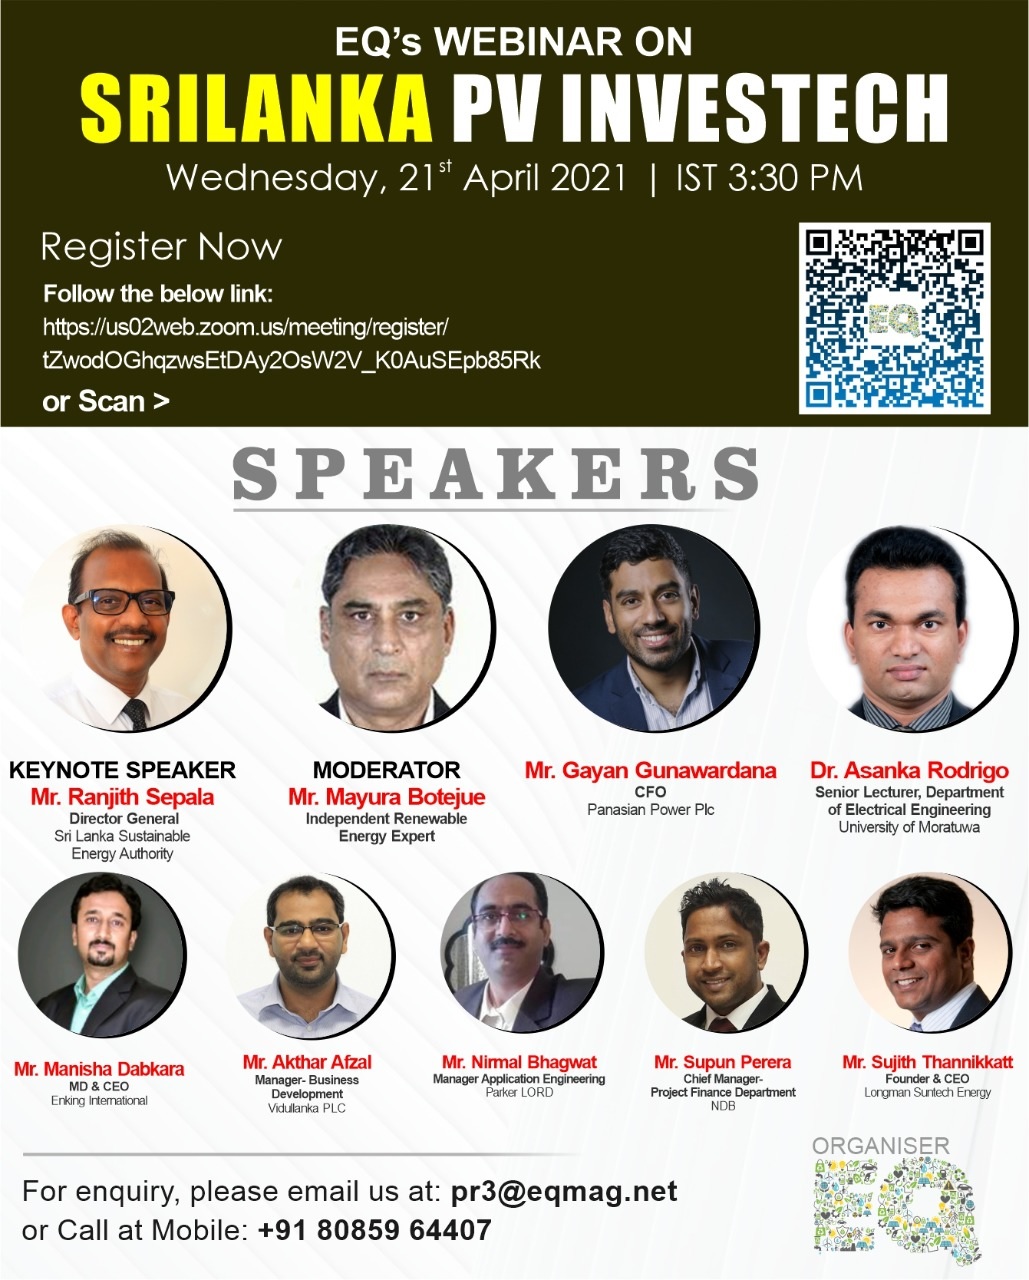 EQ Sri Lanka PV InvesTech on Wednesday April 21st from 03:30 PM Onwards….Register Now !!!